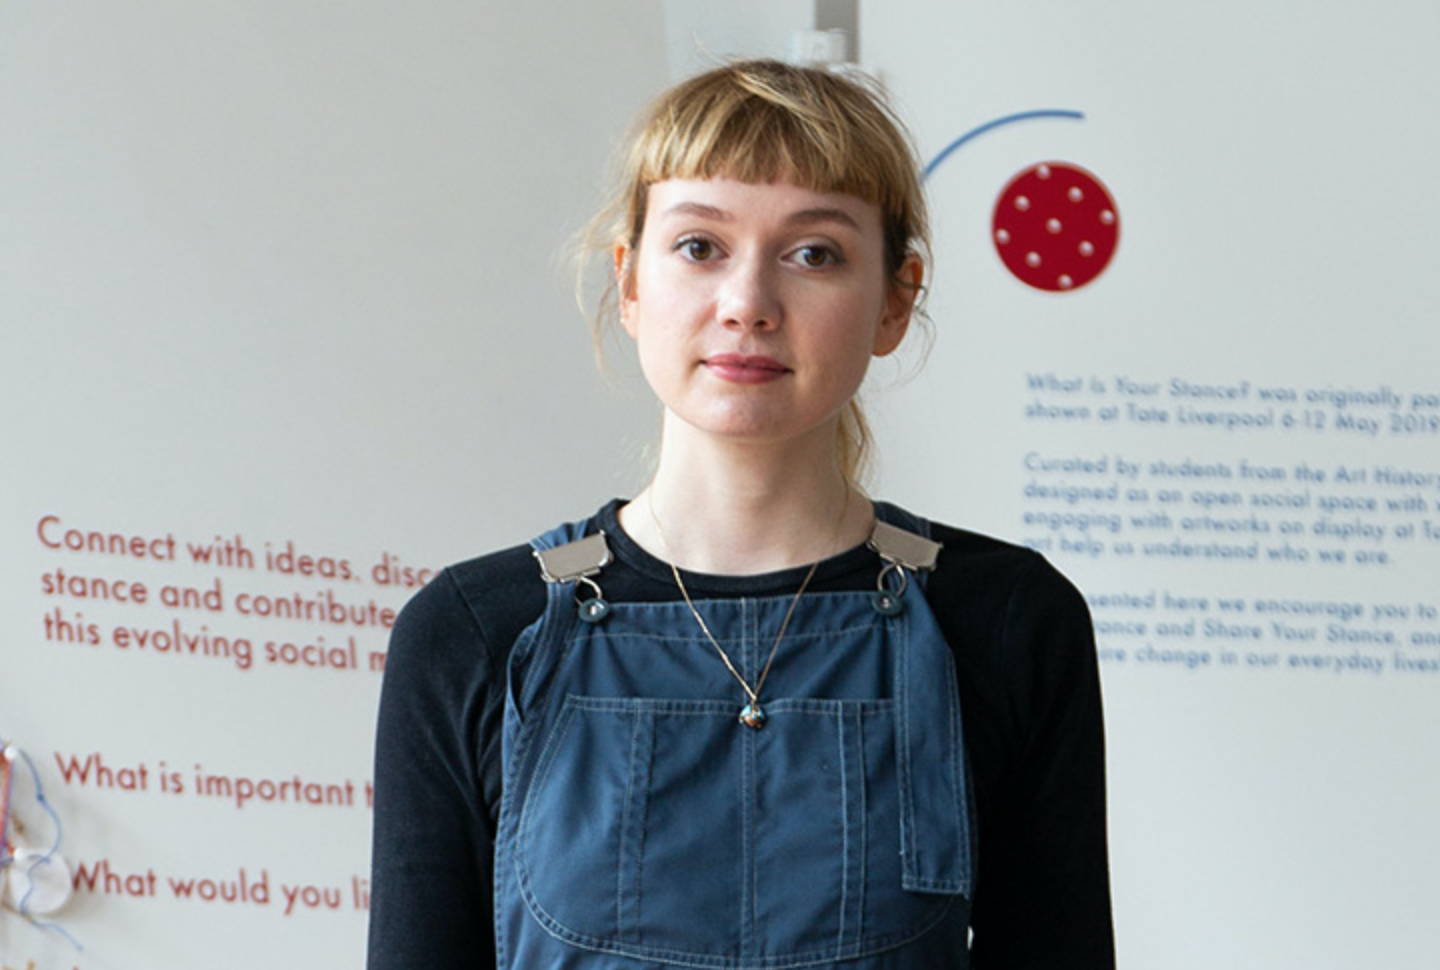 profile image of Fiona Stephens, a woman in her 20's wearing blue denim dungarees.